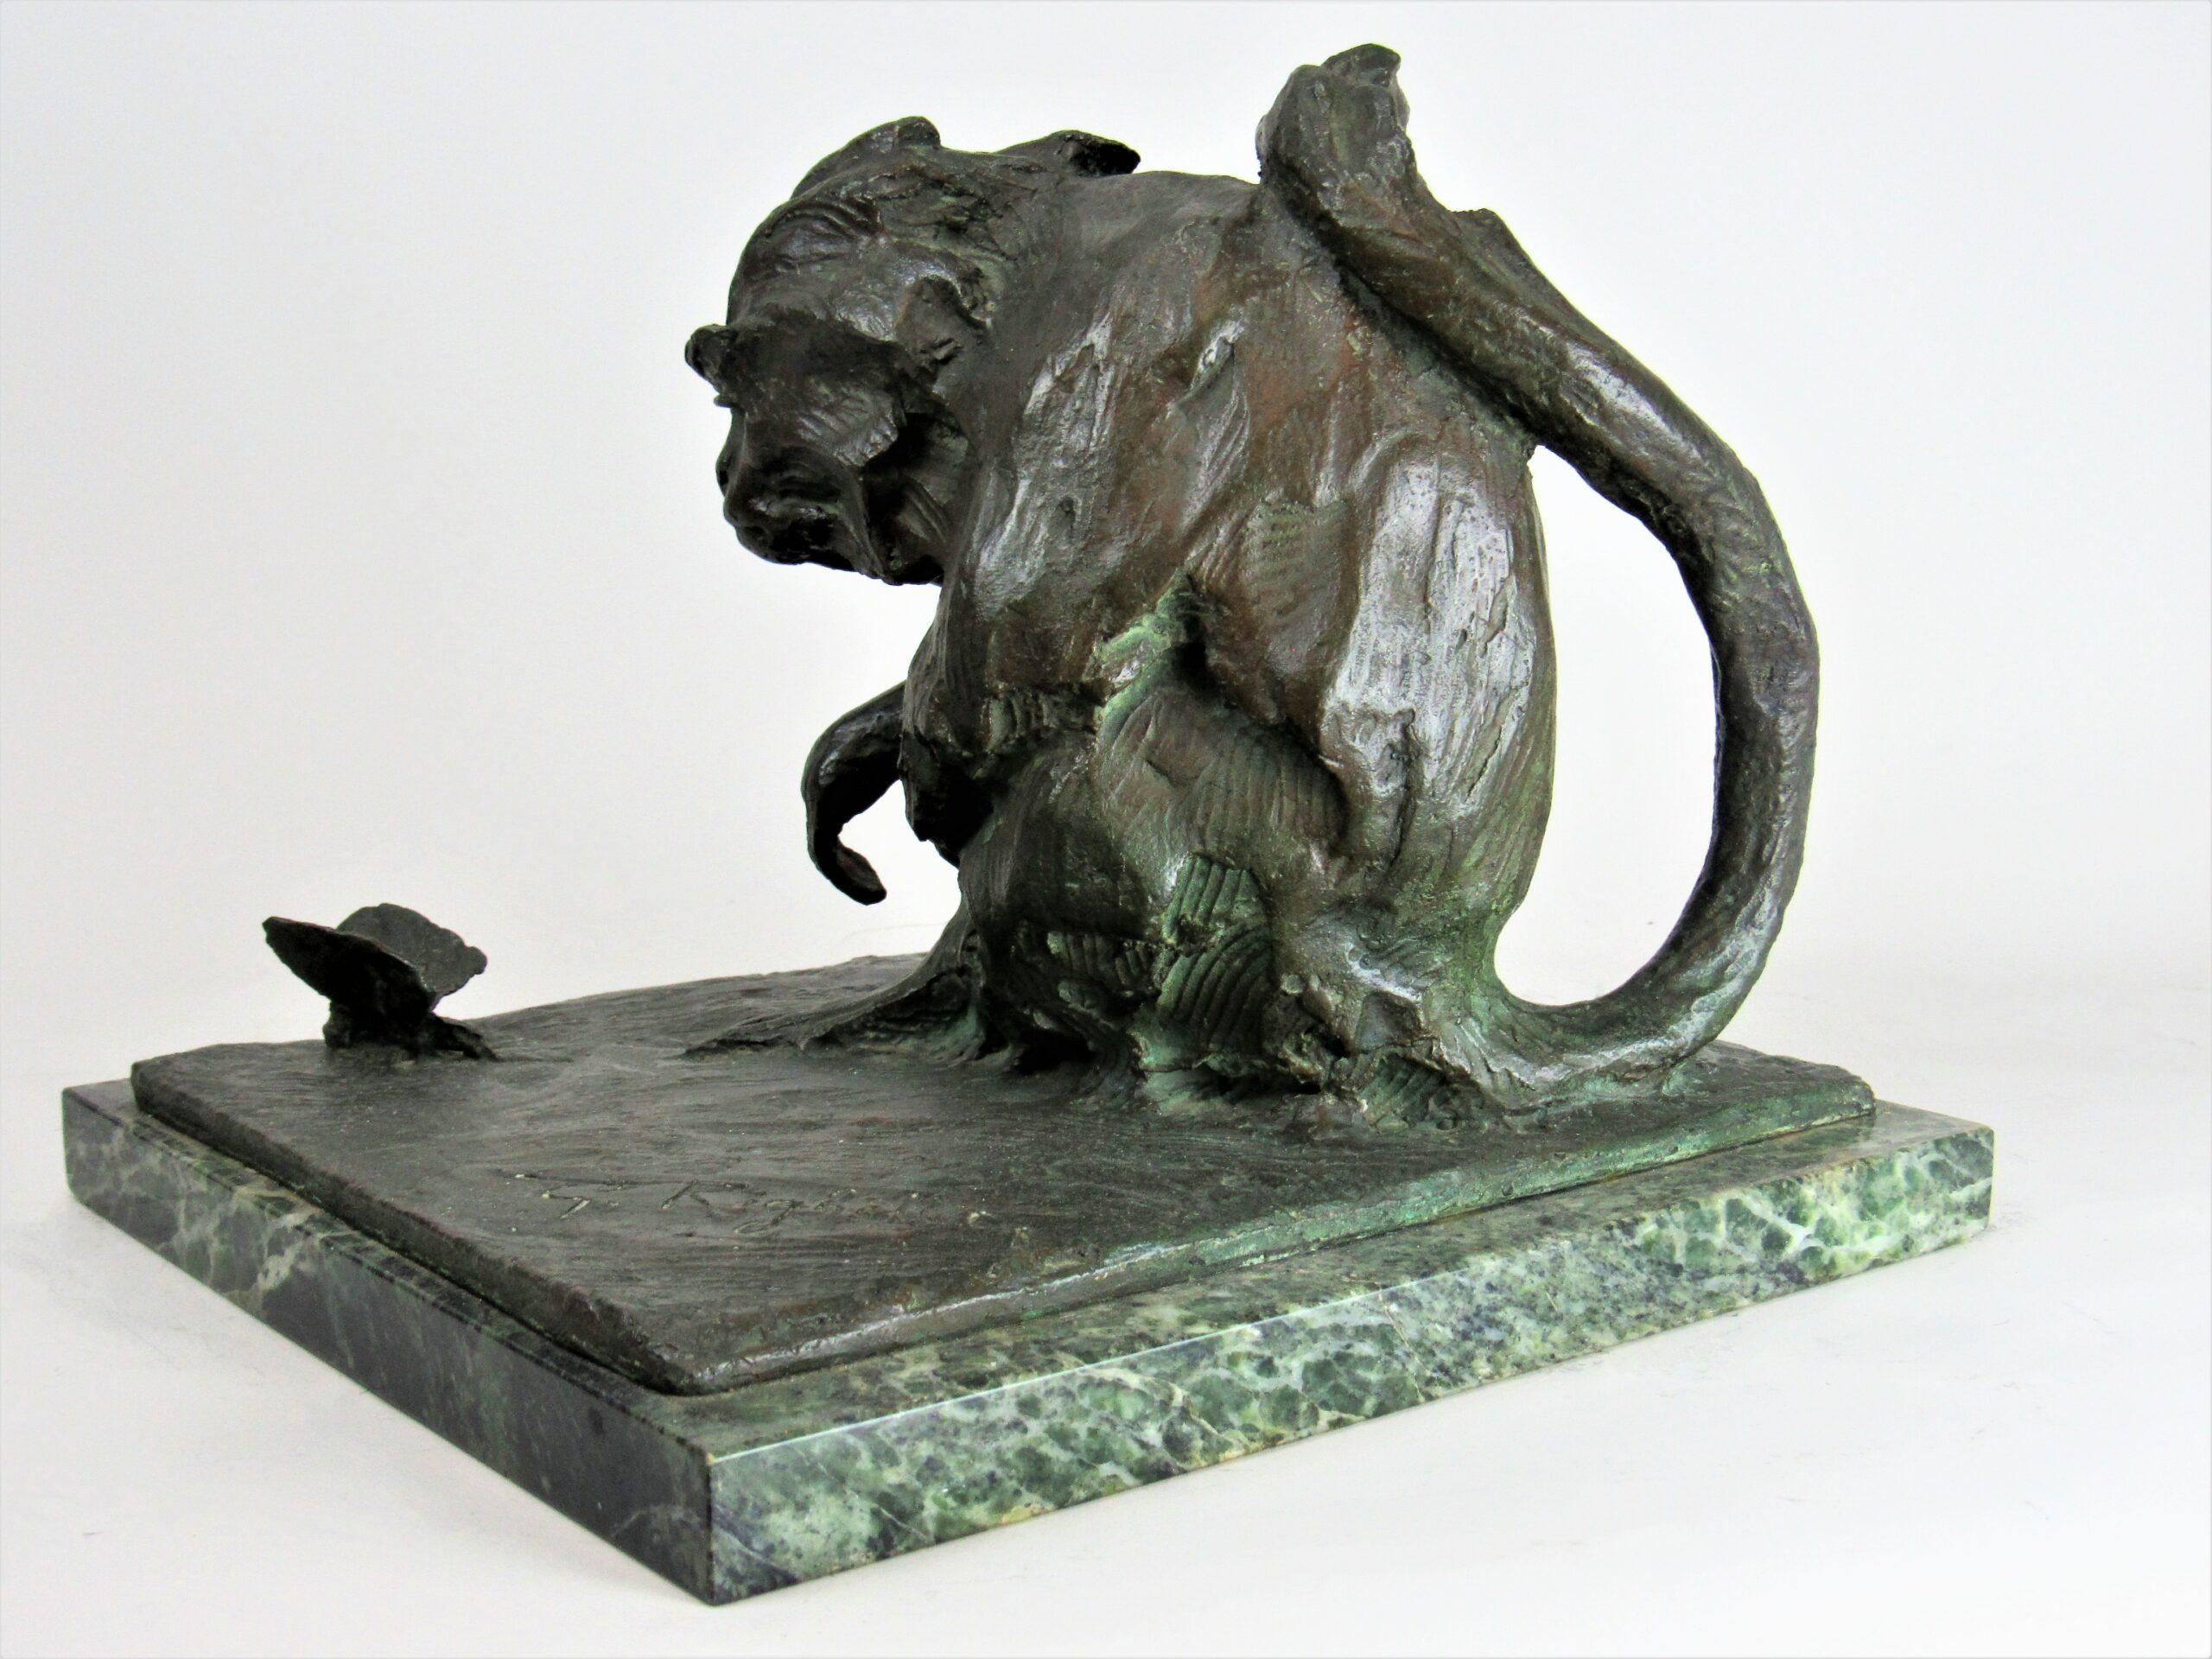 Marmoset and butterfly
This statue by Guido Rigehtti (1875-1958) represents a marmoset monkey looking curiously at a butterfly that has just landed at its feet. Created in the interwar period. Another version of this statue without the butterfly